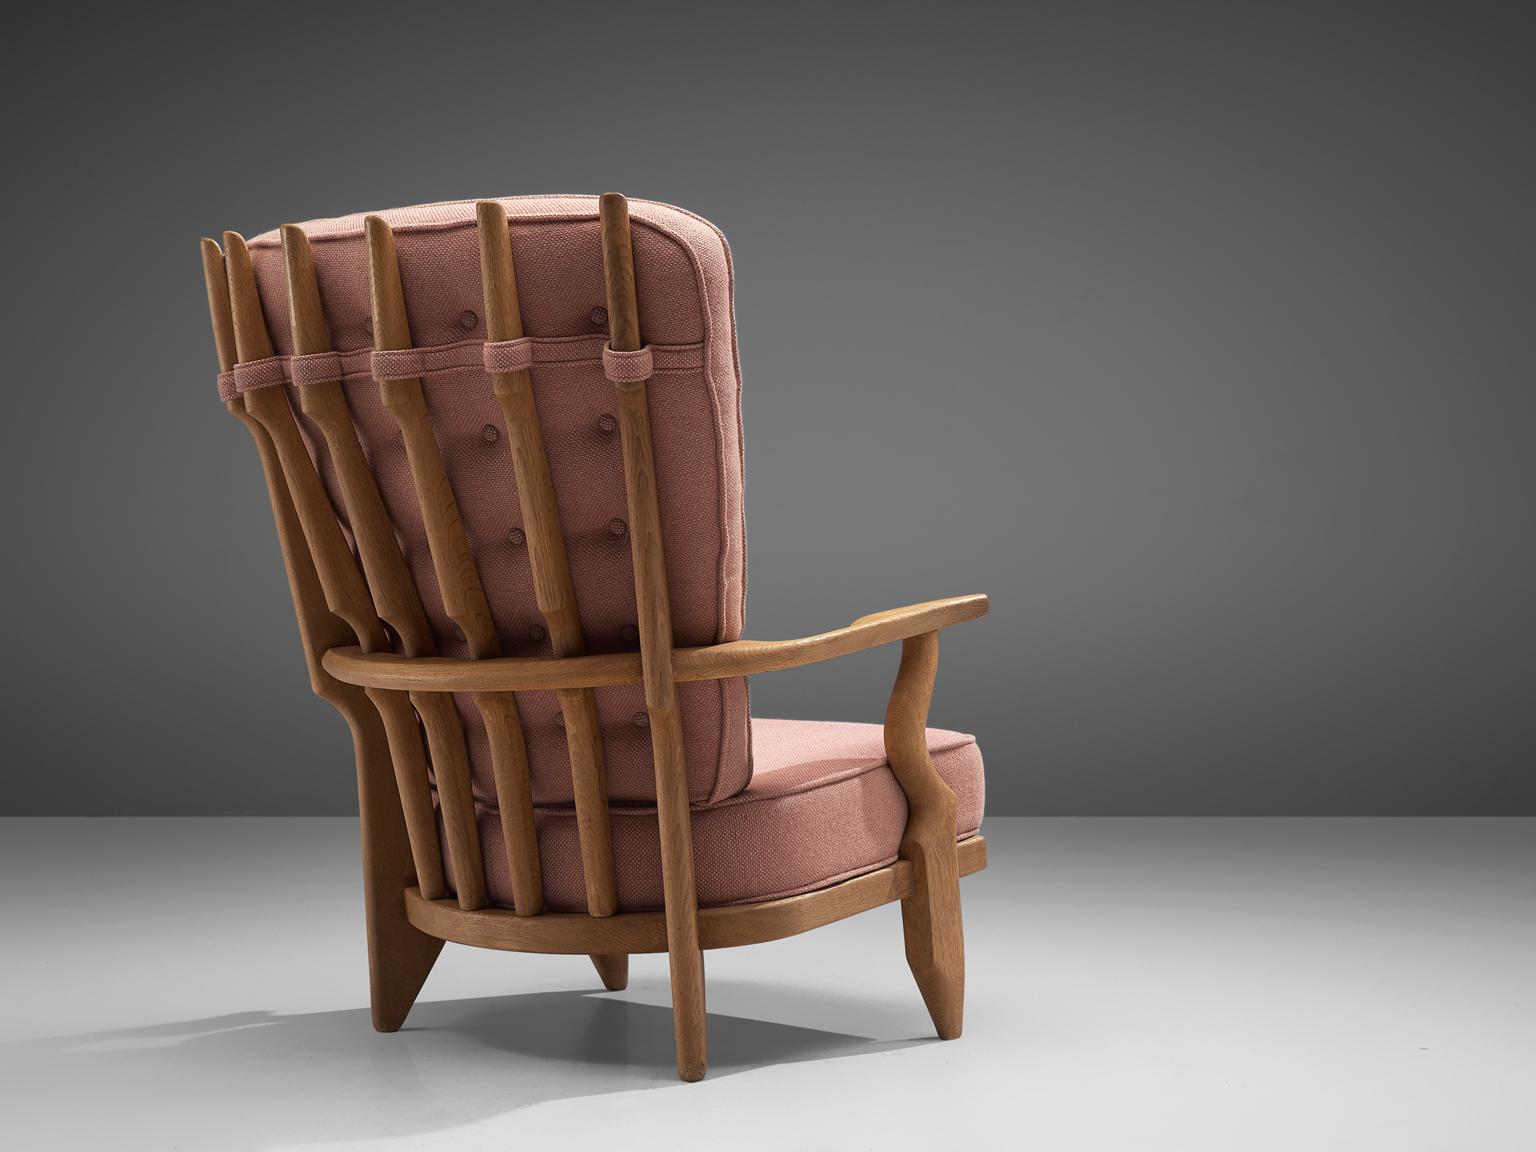 Guillerme et Chambron,'Grand Repos' lounge chair, oak and fabric, France, 1960s. 

Guillerme and Chambron are known for their high quality solid oak furniture, from which this is another great example. This chair with a high back has an